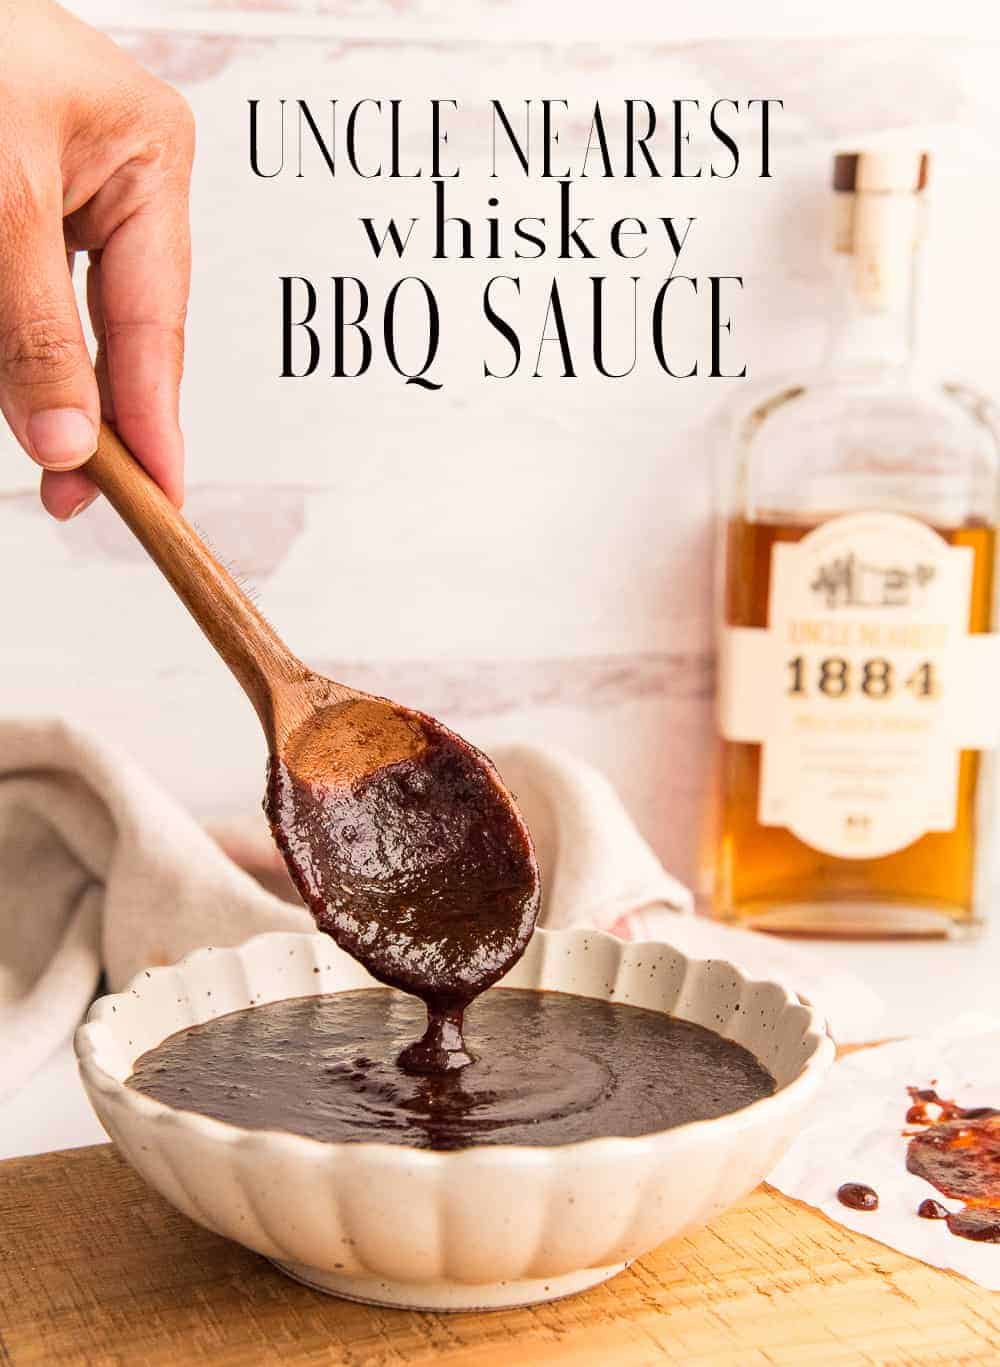 Switch up your BBQ recipes with this Uncle Nearest Whiskey BBQ Sauce. This easy-to-make sauce is the perfect topping for all of your grilled and smoked Meats. Using the finest whiskey available, you'll see that making your own BBQ sauce from scratch is much tastier than any bottled version. #BBQSauce #UncleNearestWhiskey #TennesseeWhiskey #whiskey #CookingWithWhiskey #WhiskeyRecipes #GrillingRecipes #SmokingRecipes #BlackOwnedWhiskey #UncleNearest #BarbecueSauceRecipe #Meats #BlackFoodBloggers #BlackFoodBloggerRecipe #Juneteenth #4thOfJuly #IndependenceDay #LaborDay via @ediblesense